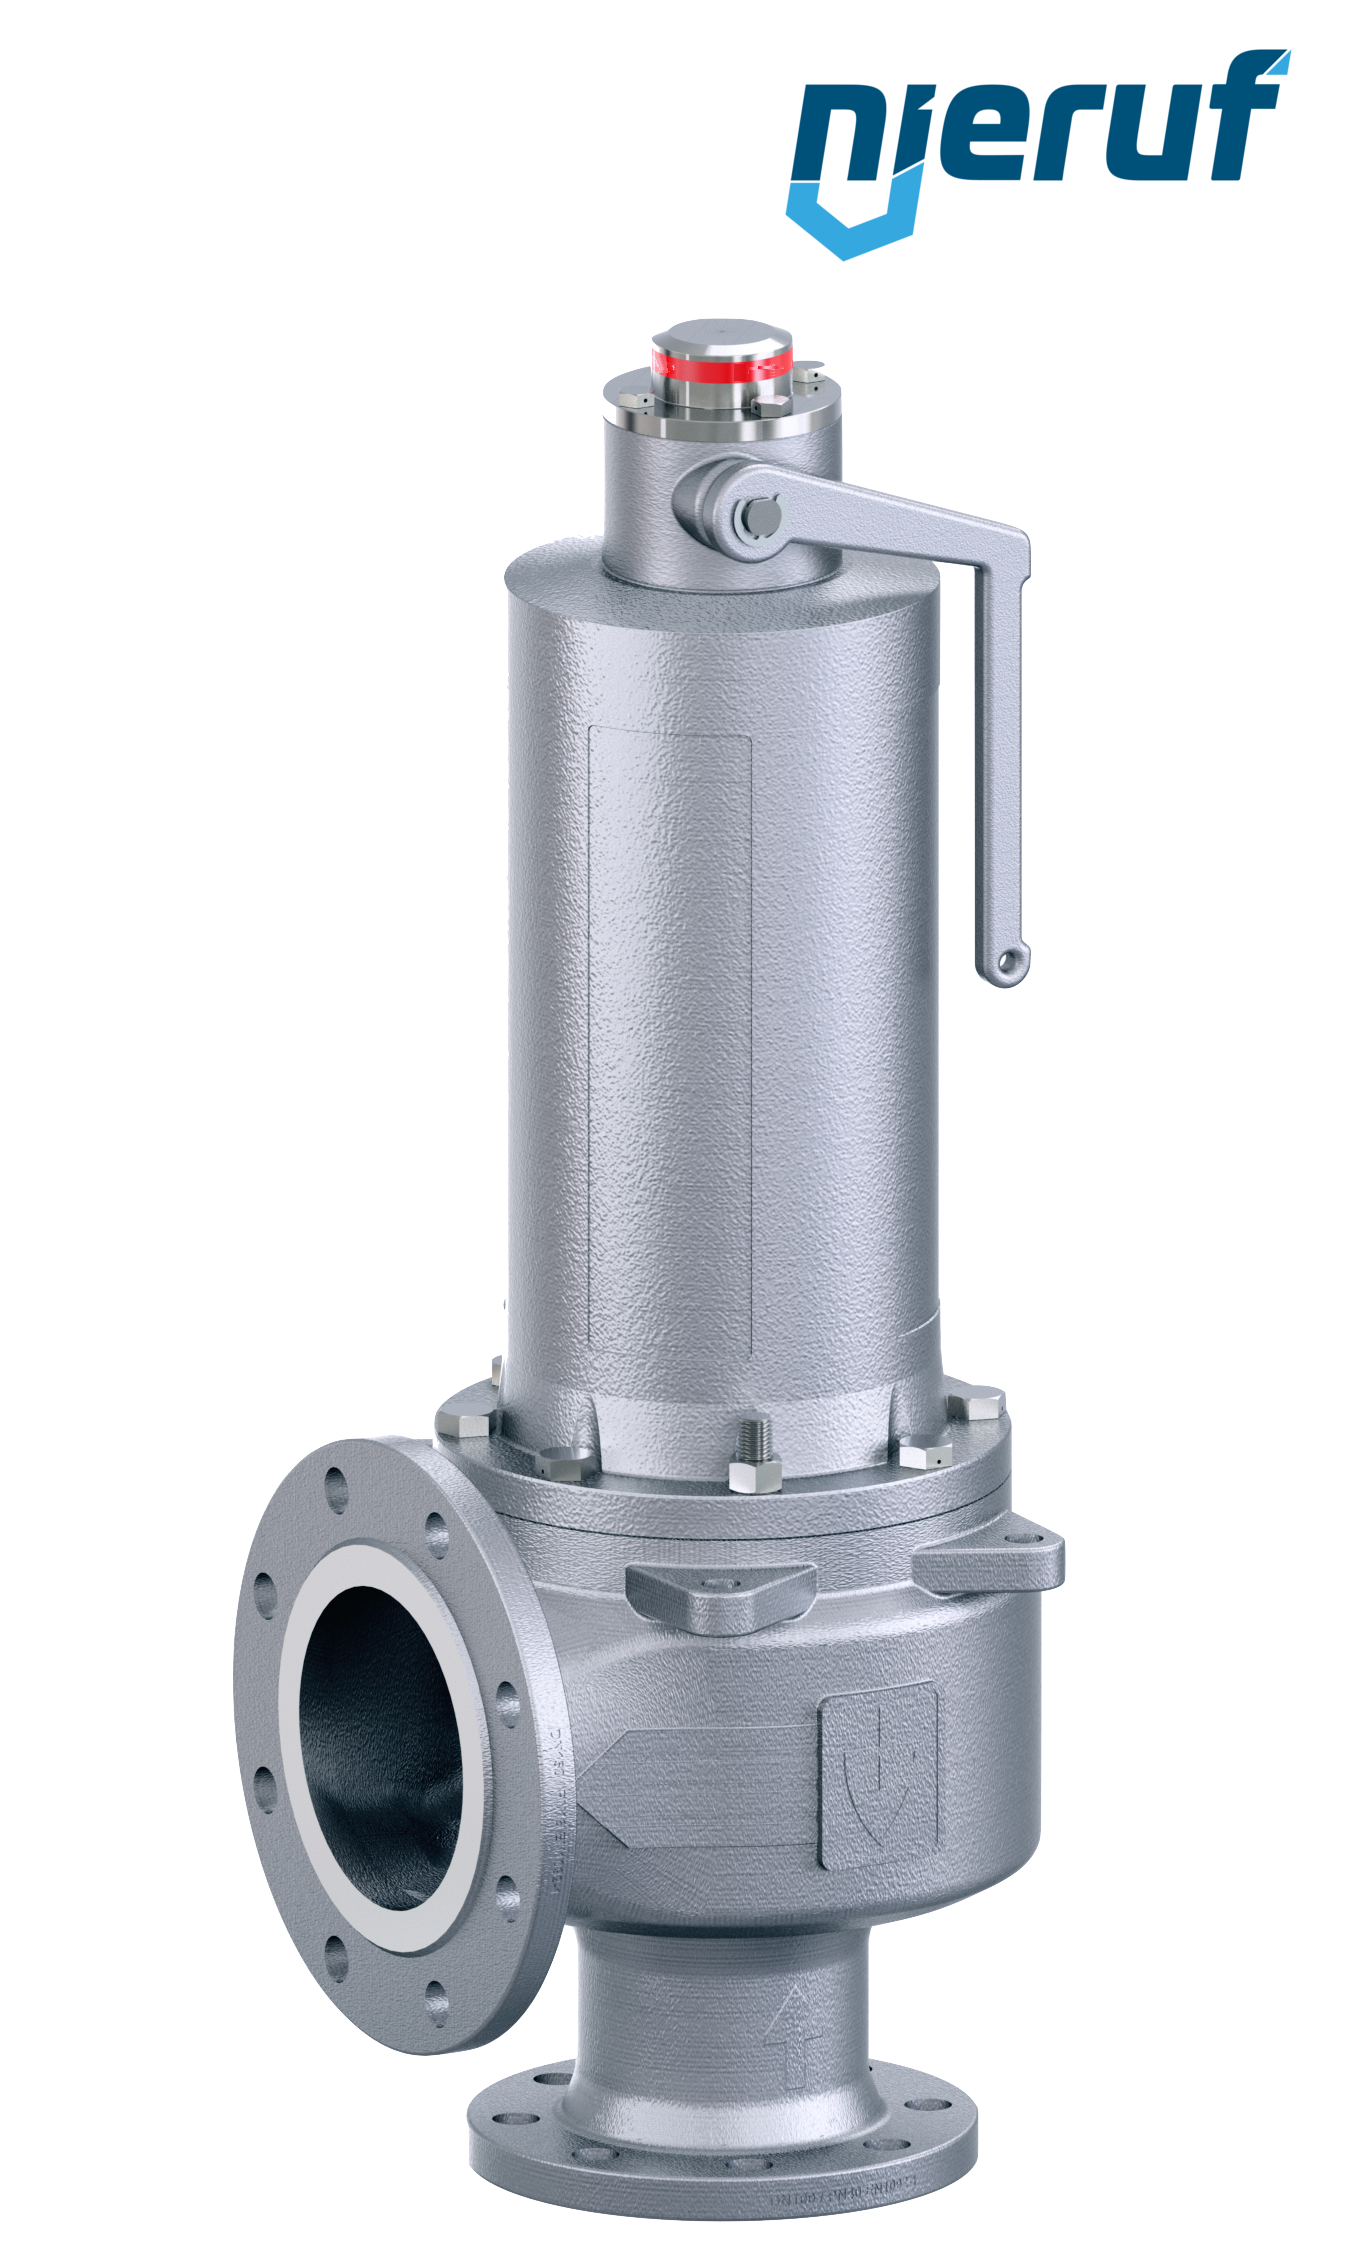 flange-safety valve DN20/DN32 SF04, stainless steel metal, with lifting device lever